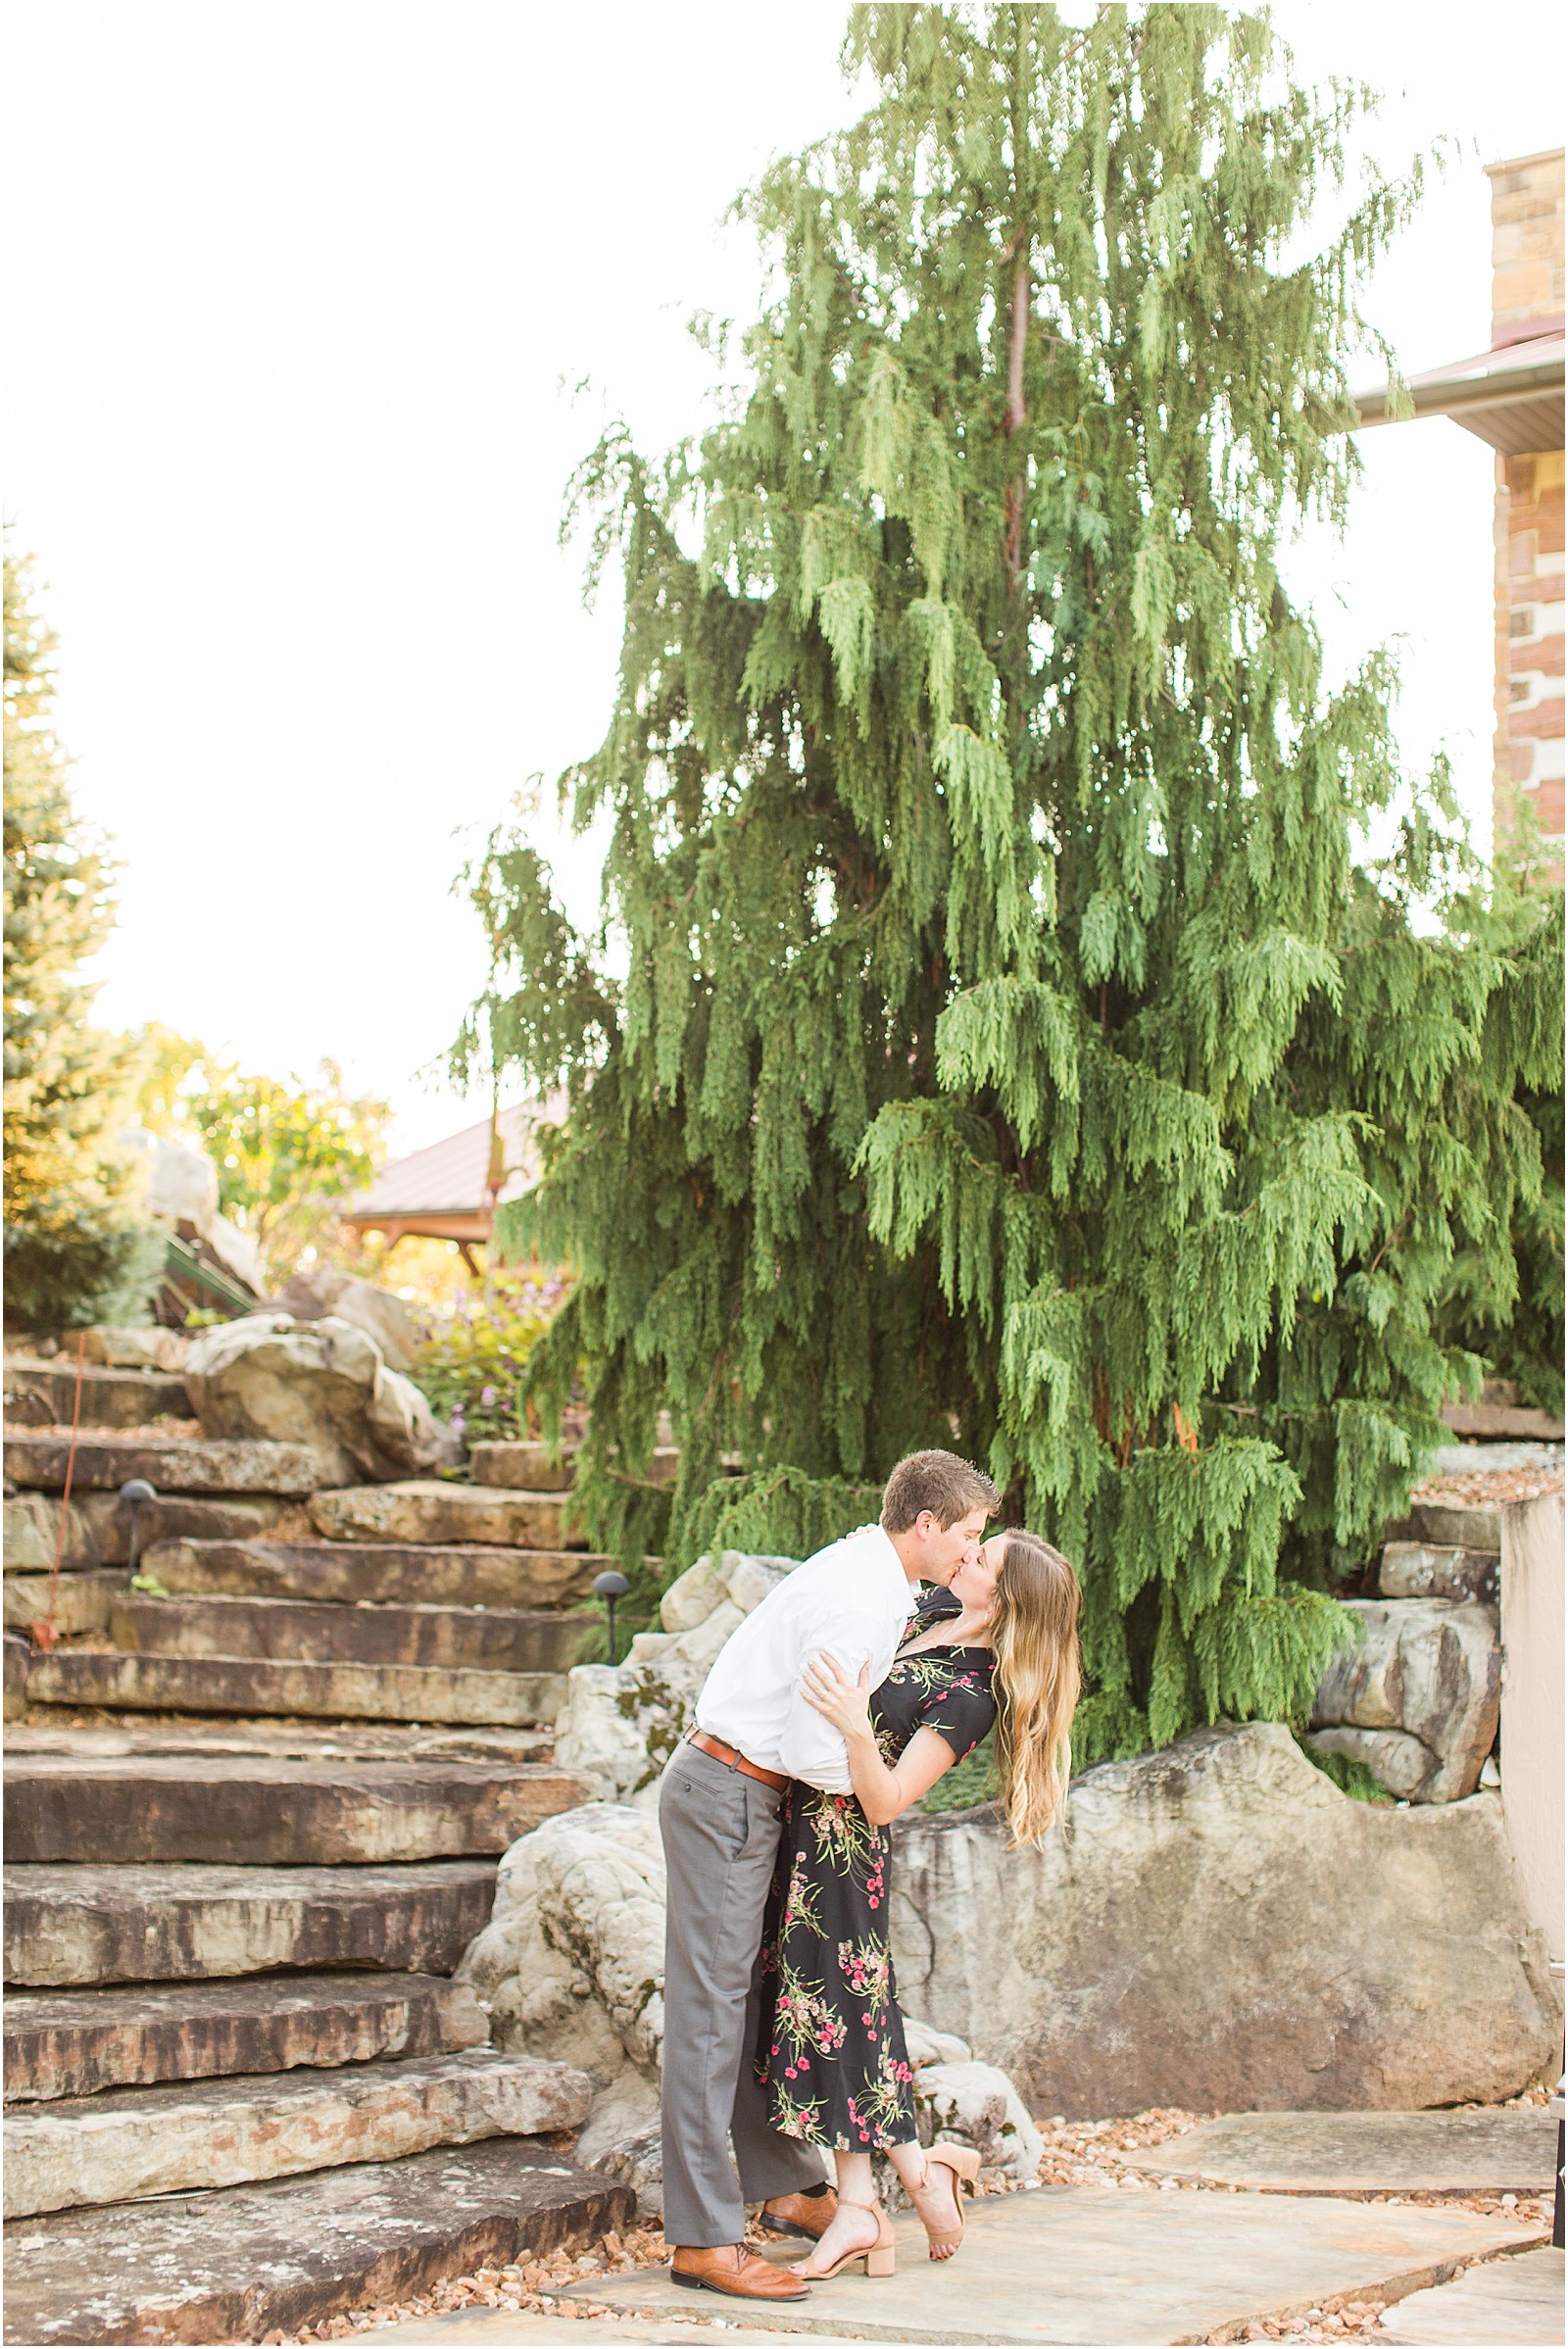 A Jasper Indiana Engagement Session | Tori and Kyle | Bret and Brandie Photography019.jpg